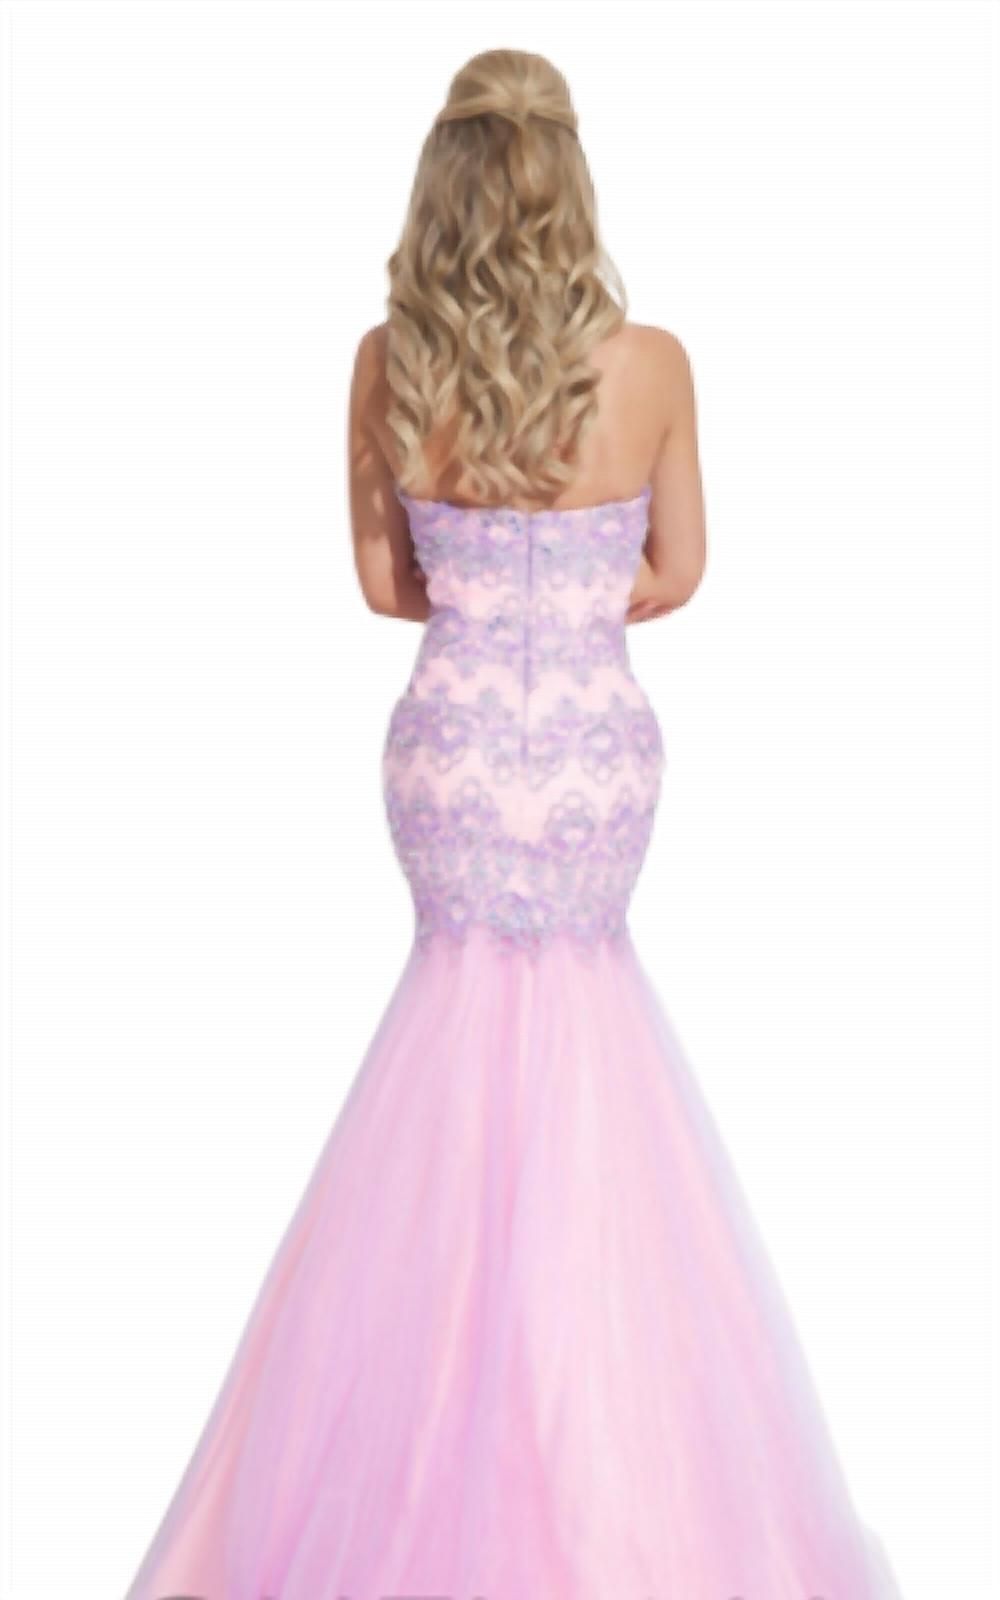 Style 1-3533376047-520 RACHEL ALLAN Plus Size 18 Strapless Lace Pink Mermaid Dress on Queenly